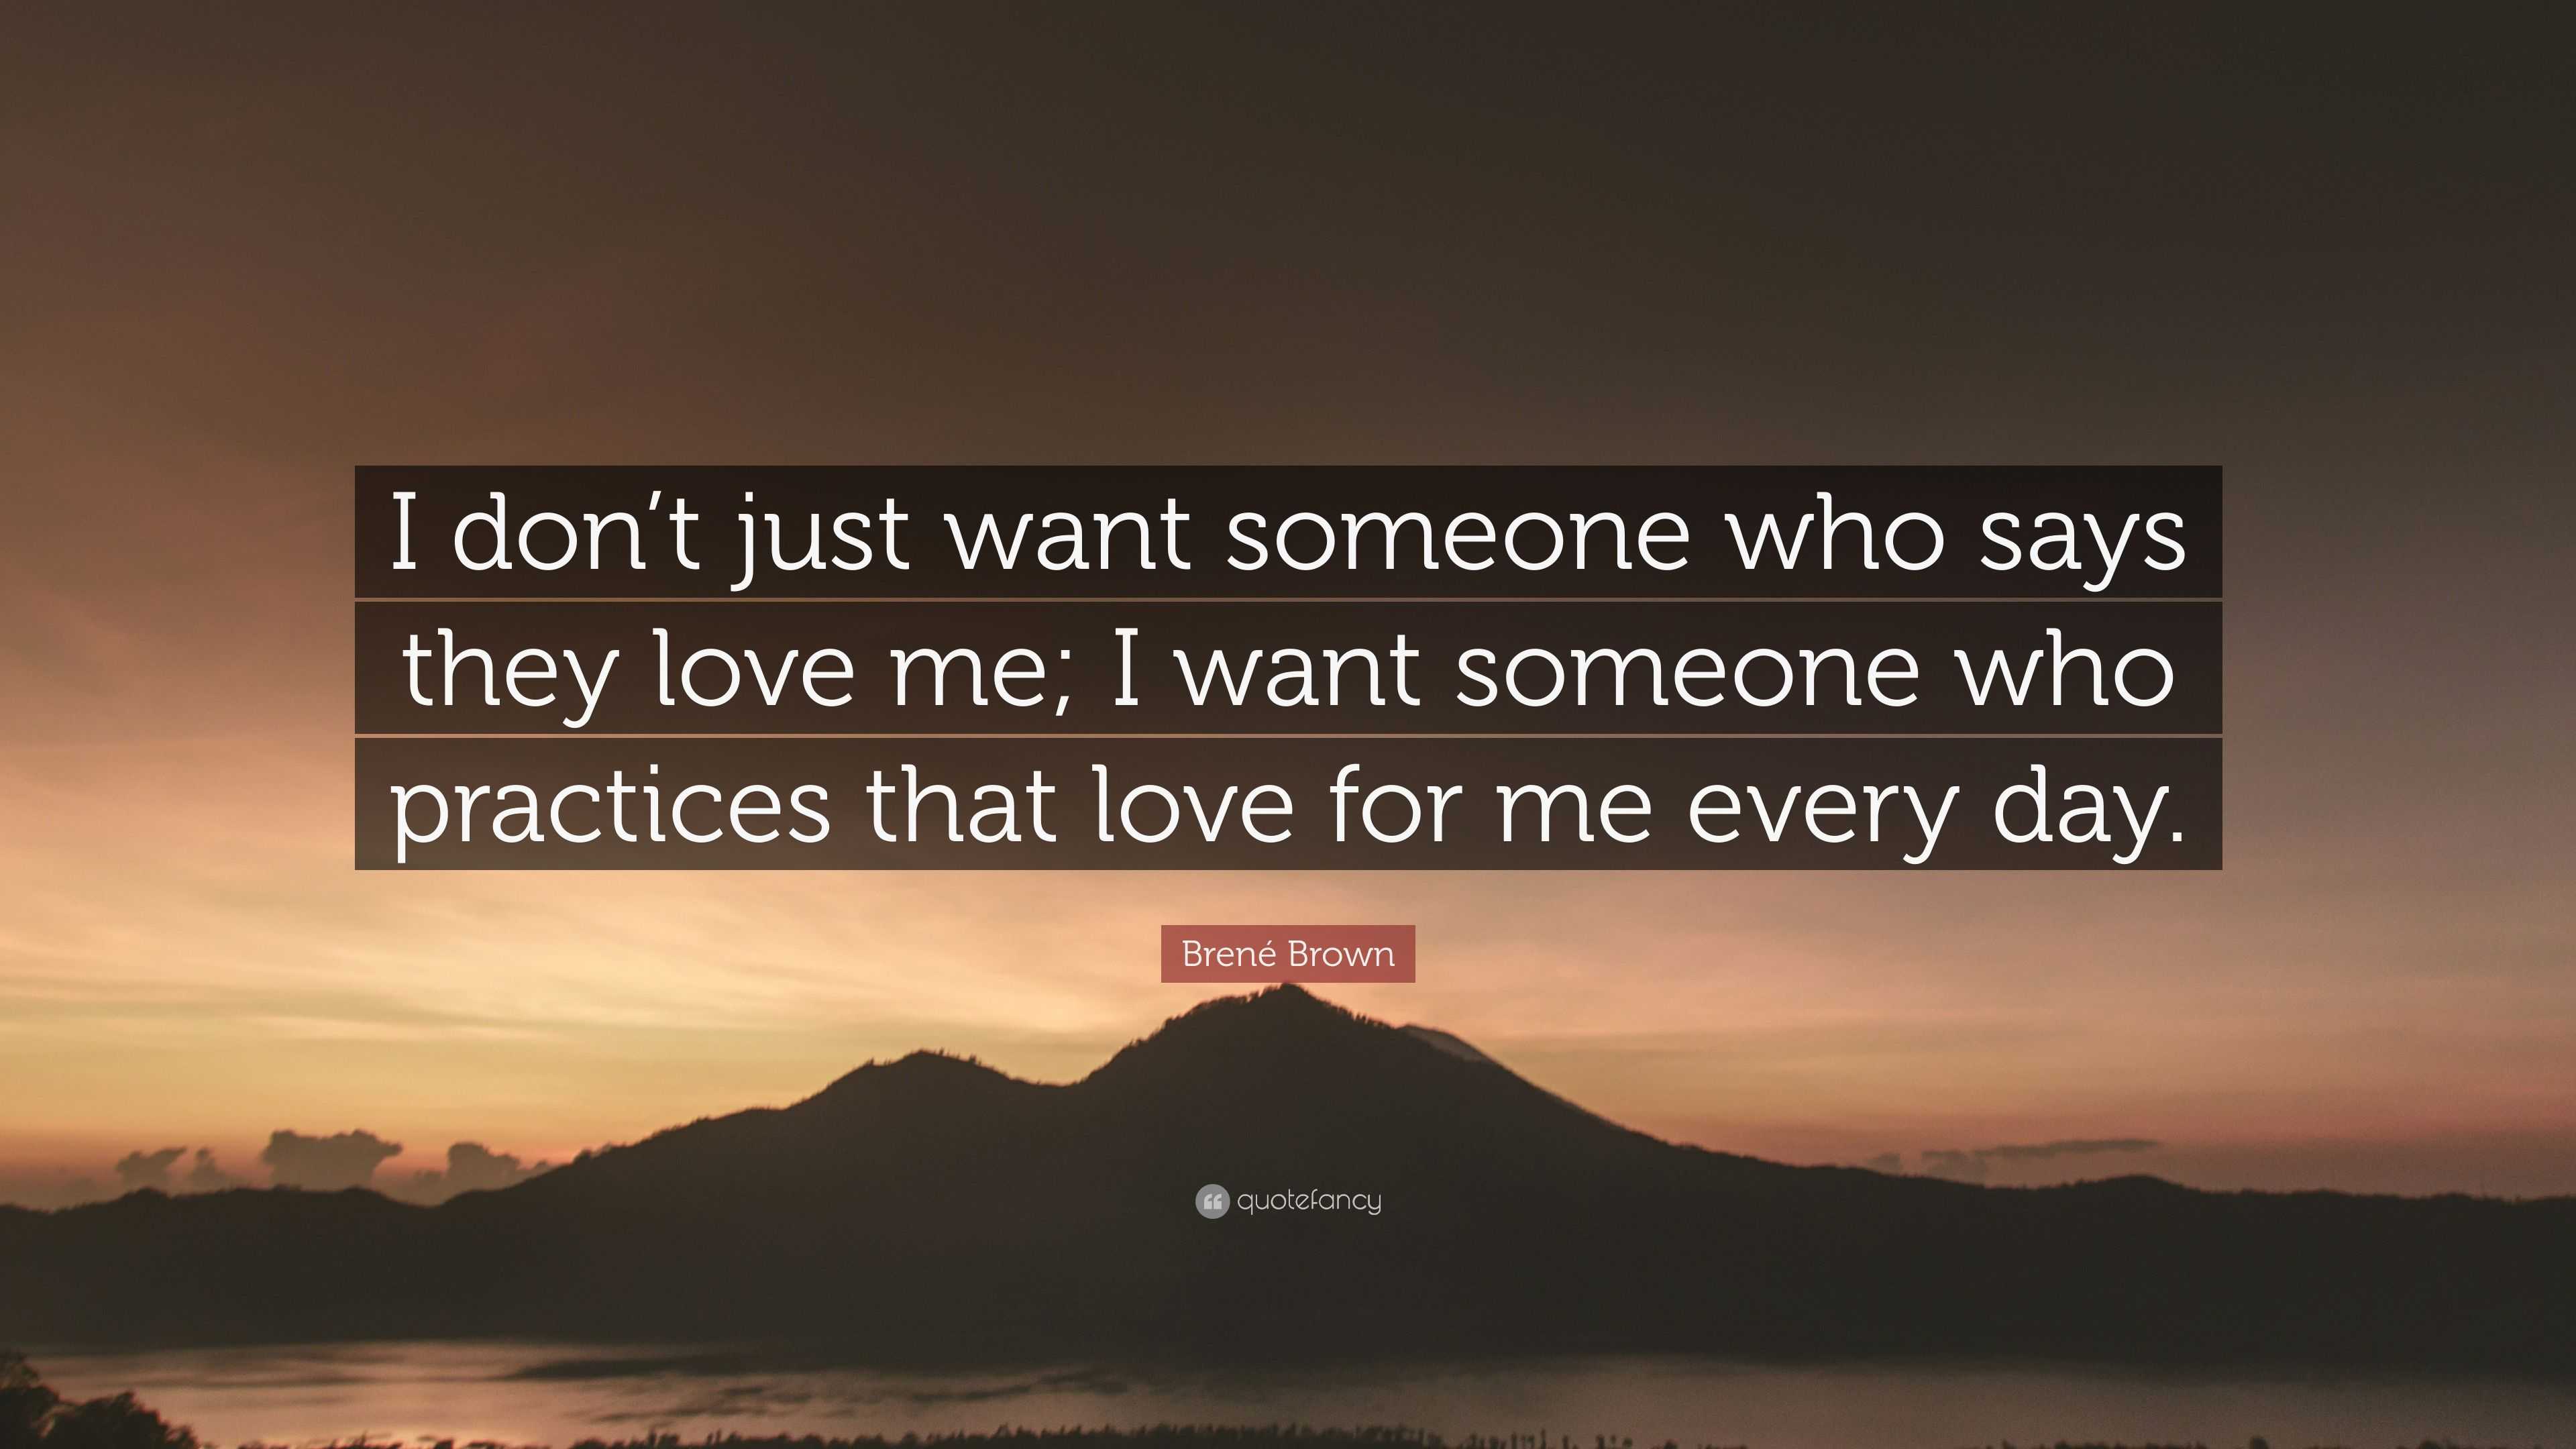 Brené Brown Quote “I don t just want someone who says they love